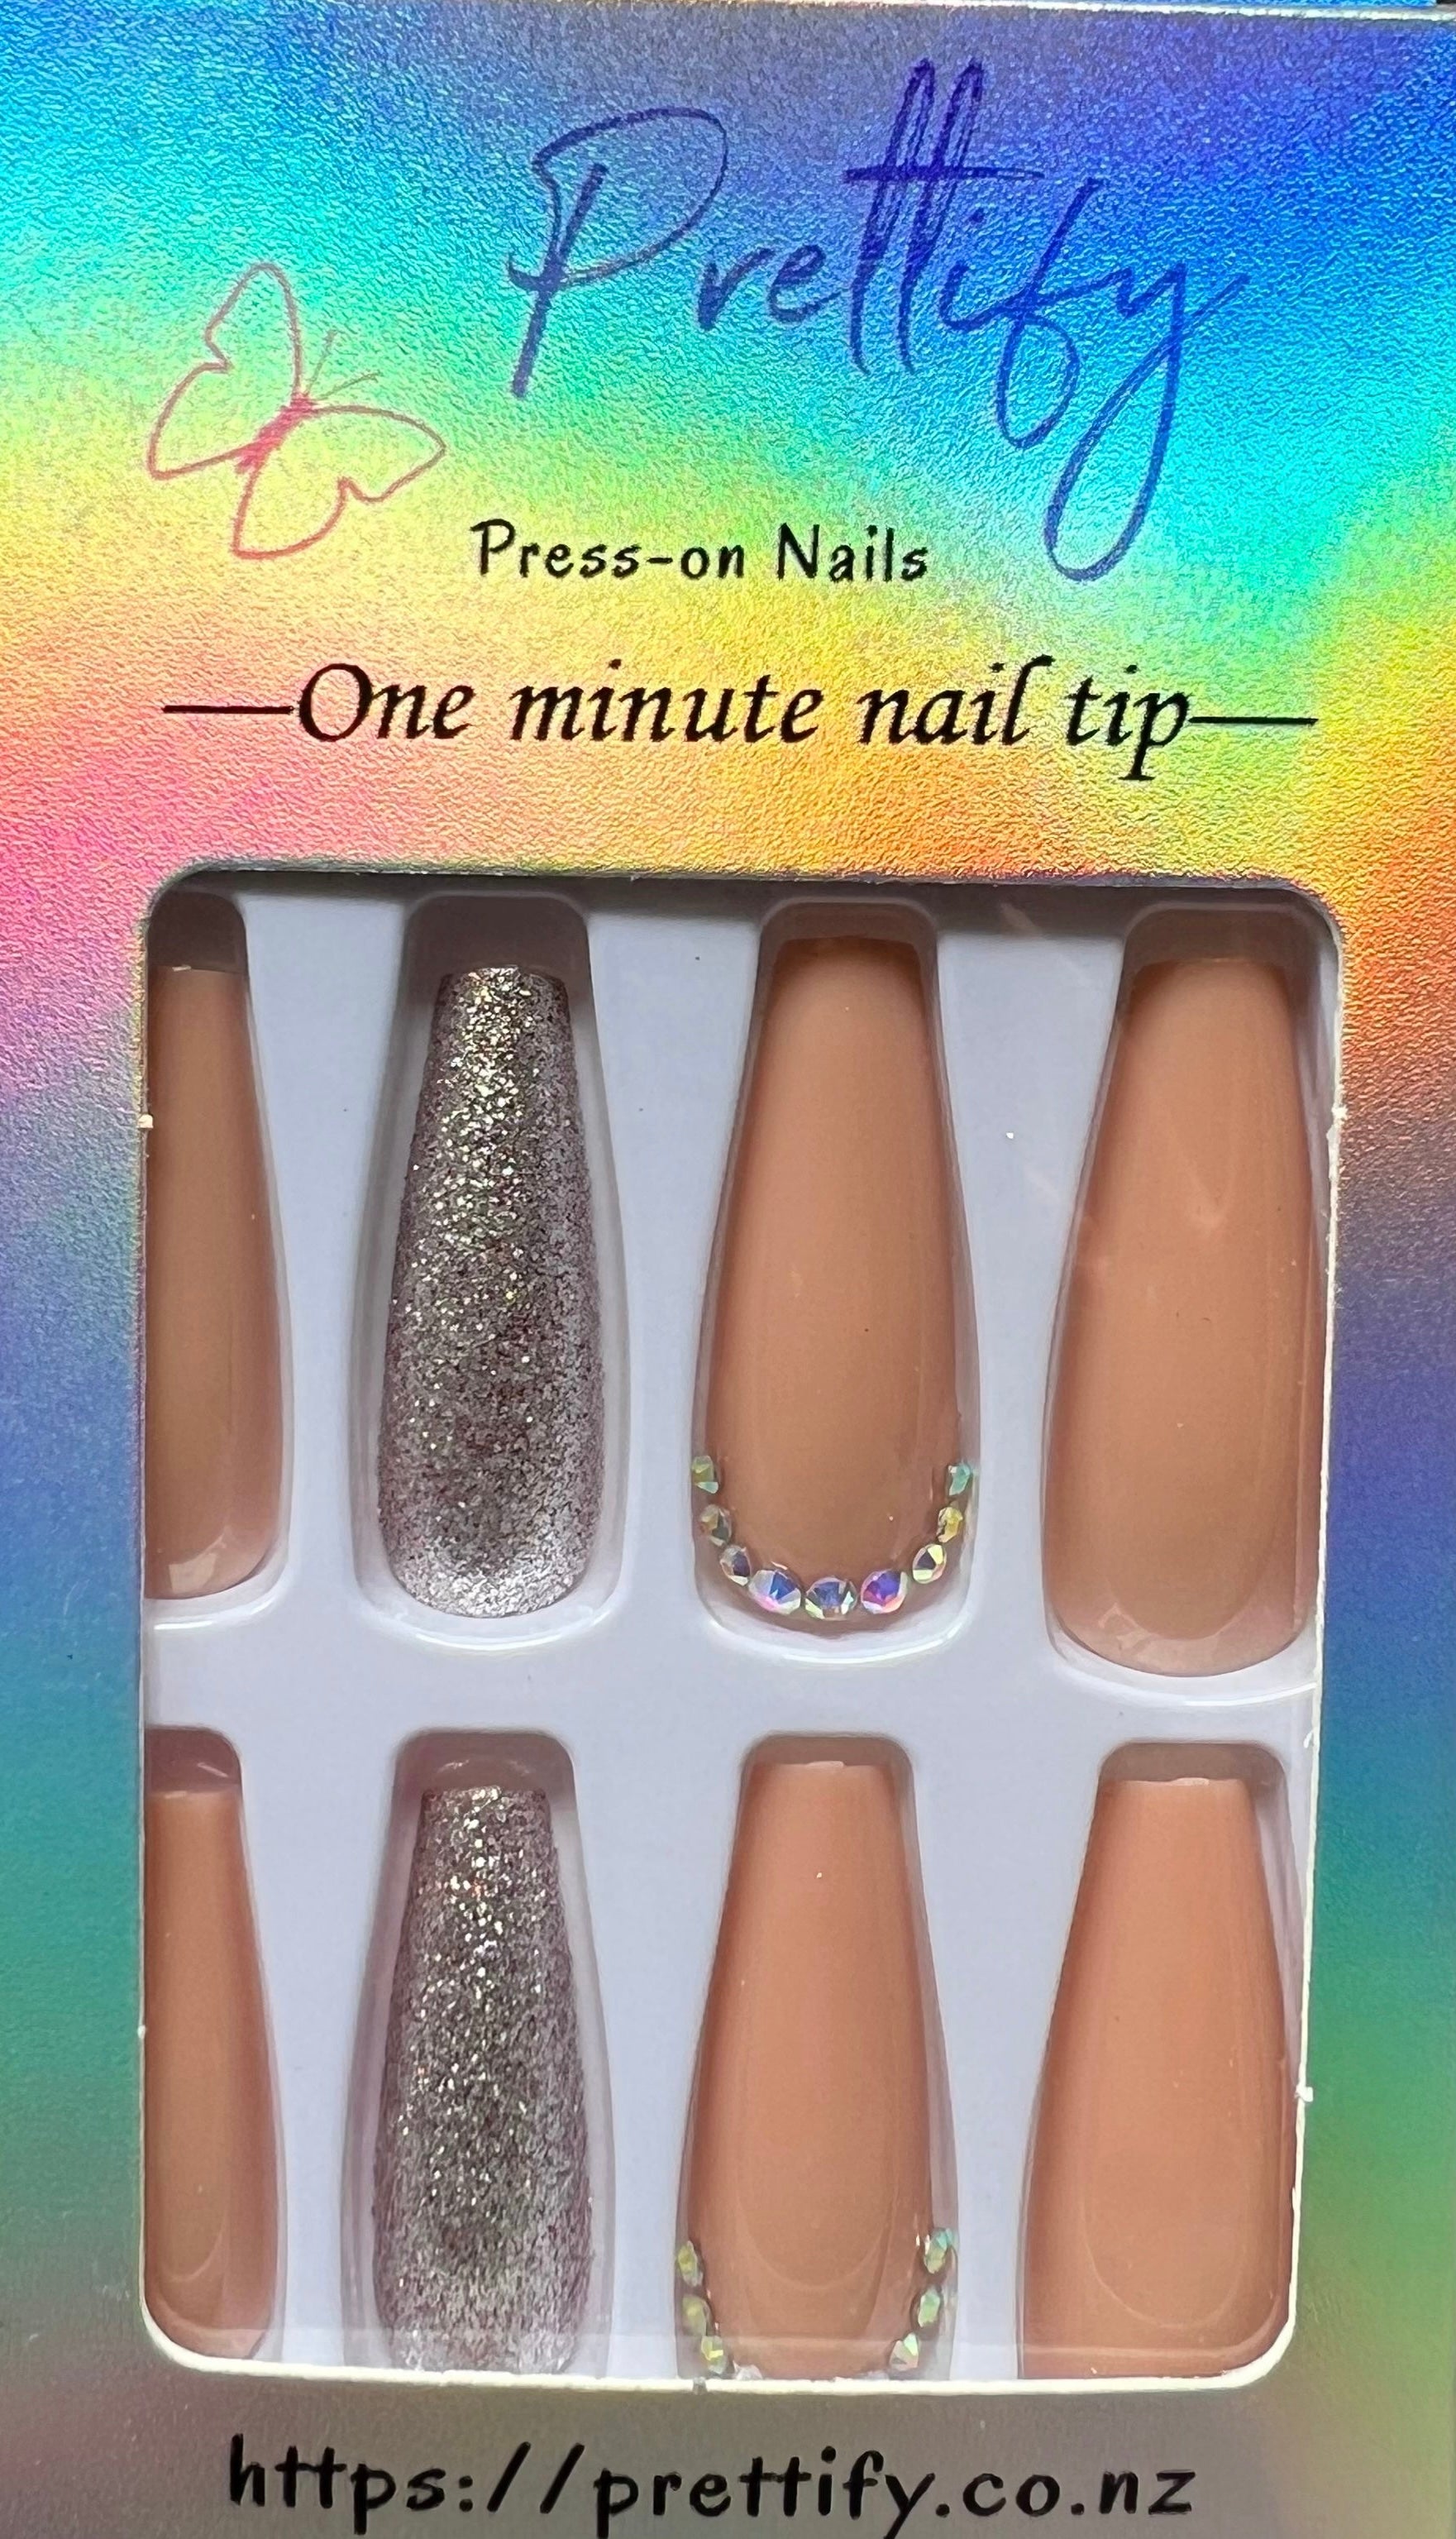 Long Coffin Press on Nails. Mocha with Glitter & Jewels. Easy and quick to apply. Great for those special occasions, parties or add an edge to any outfit. Gorgeous, flattering and you can re-use them again and again.